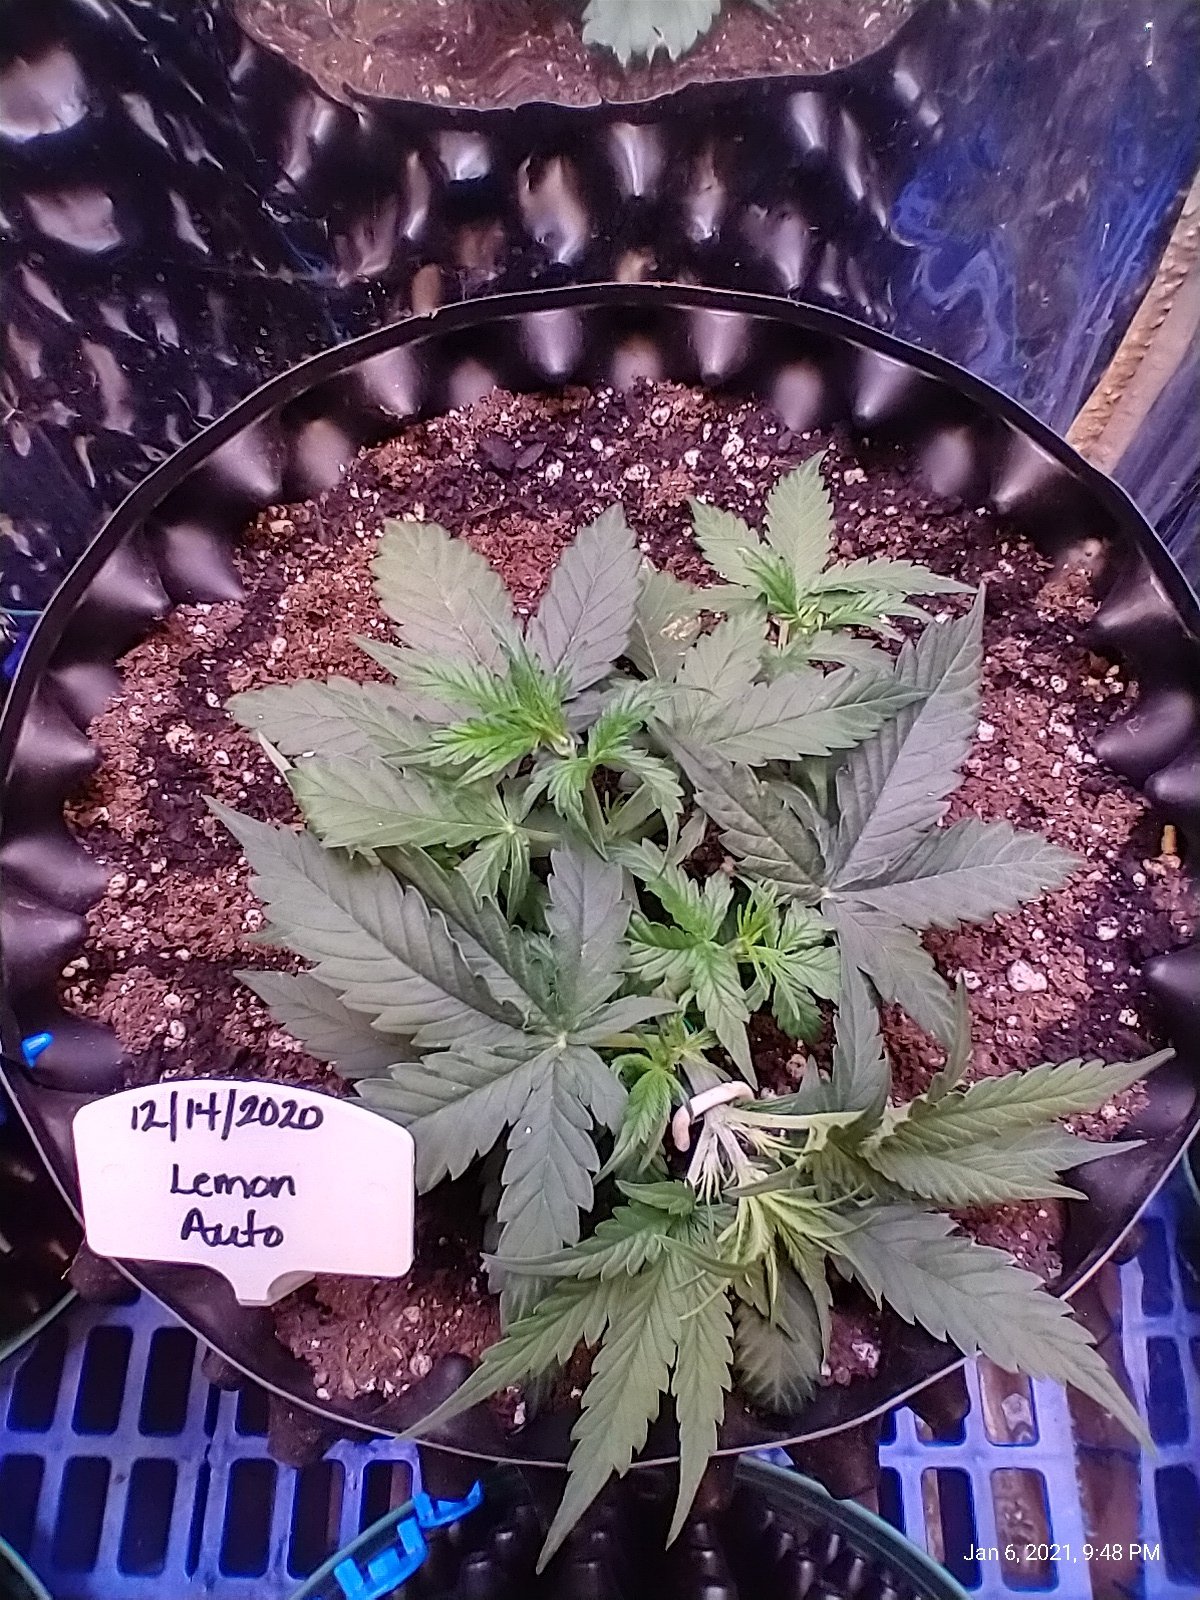 Lemon auto started flowering early in week 3 its in week 5 now lot of growth for 2 weeks